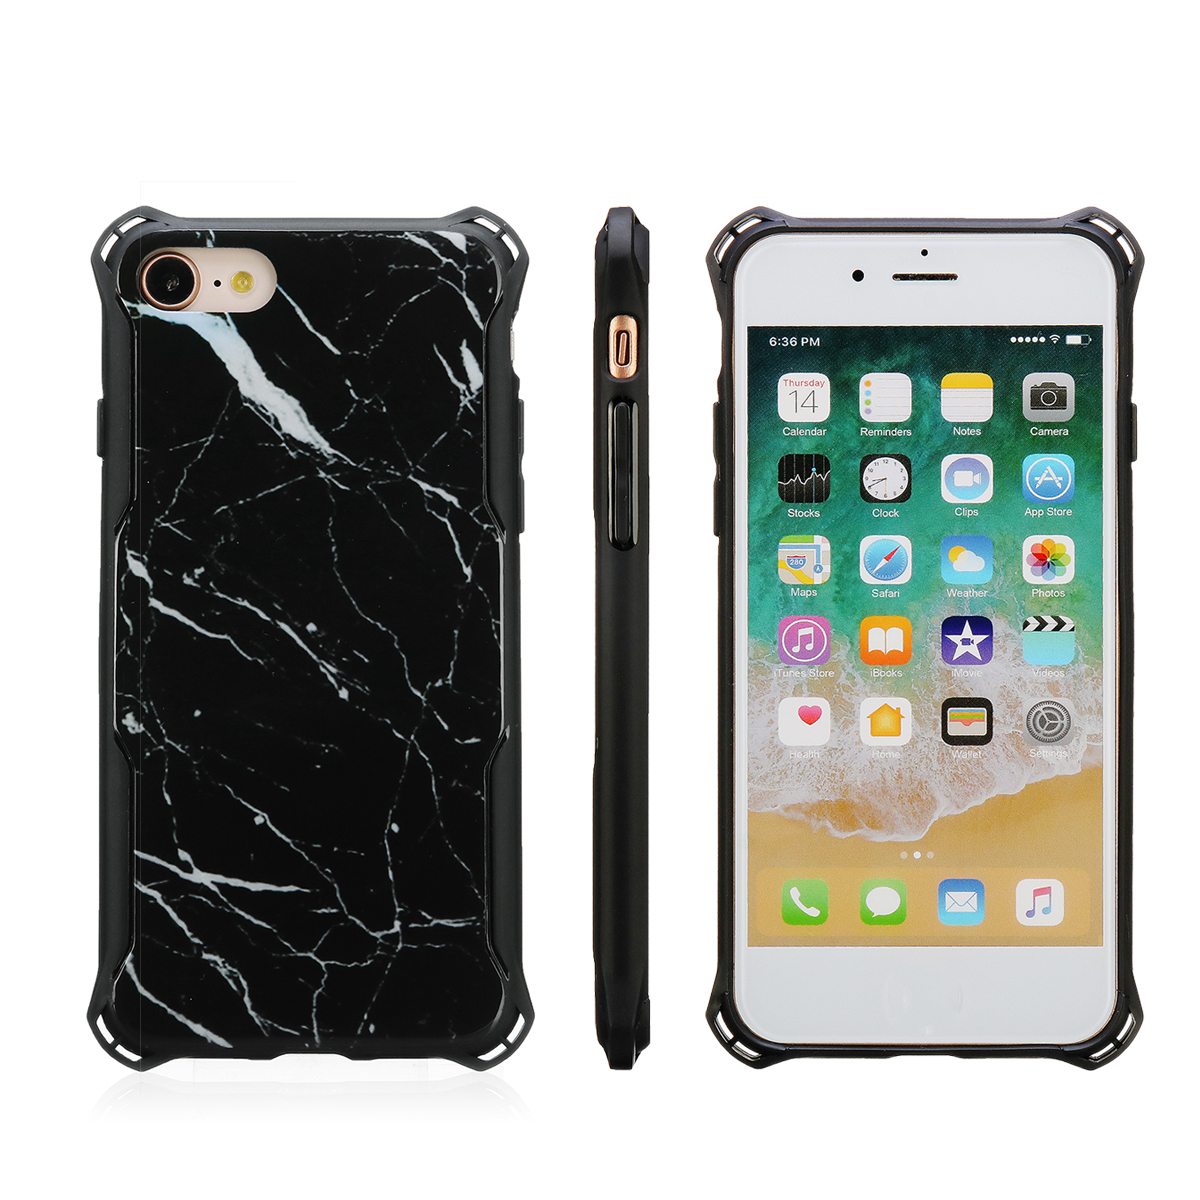 AUGIENB-Marble-Textured-Soft-TPU-Protective-Case-For-For-iPhone-XXS88-Plus77-Plus6s6s-Plus66-Plus-1397754